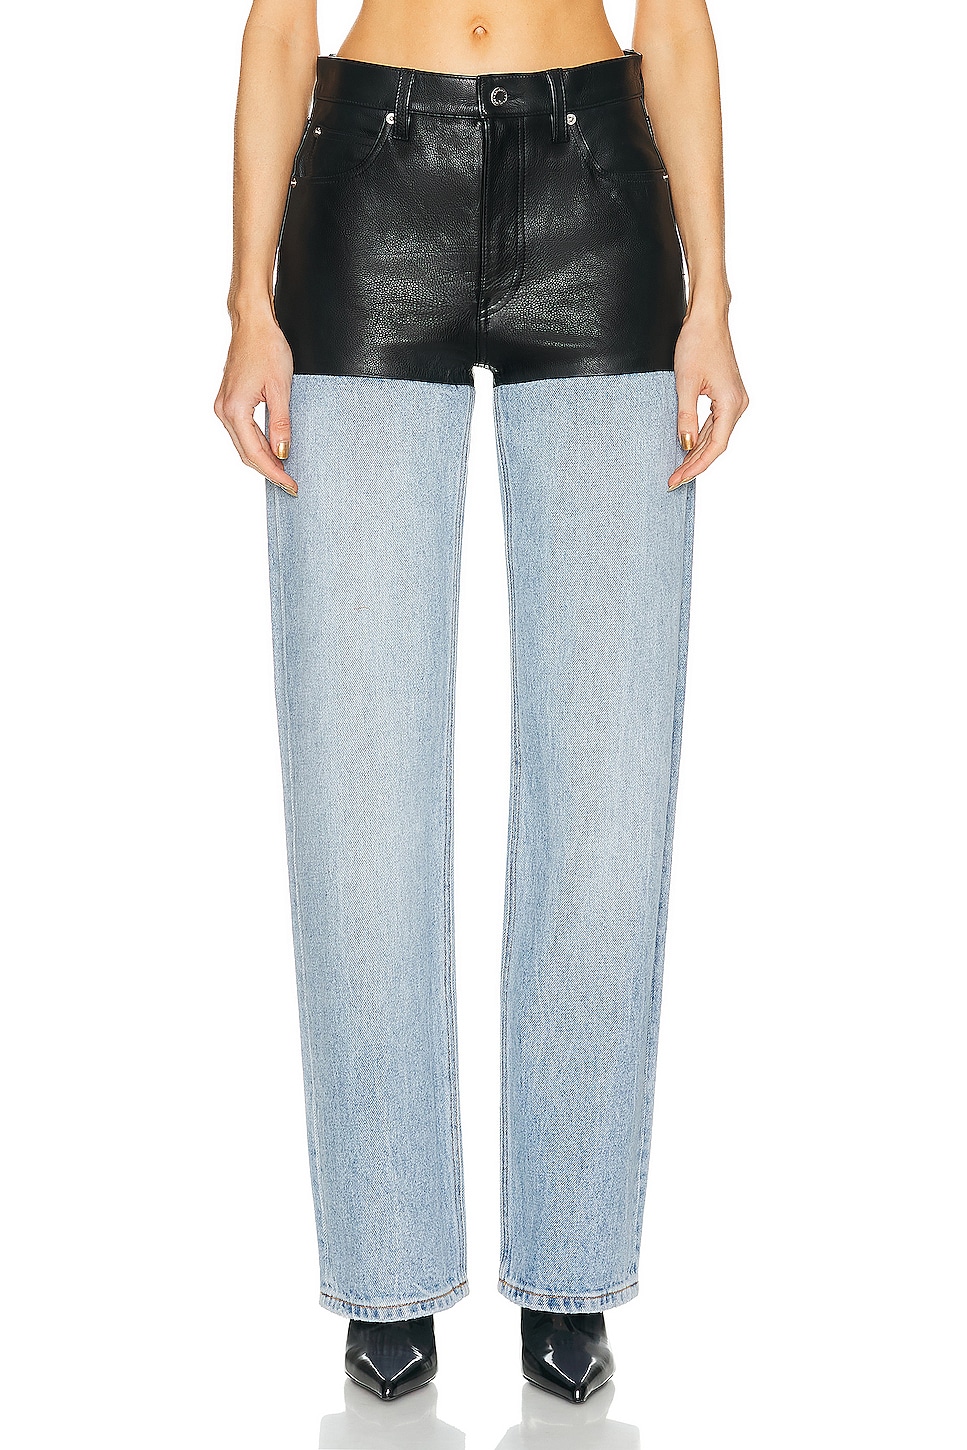 Image 1 of Alexander Wang Stacked Straight Leg in Vintage Faded Indigo